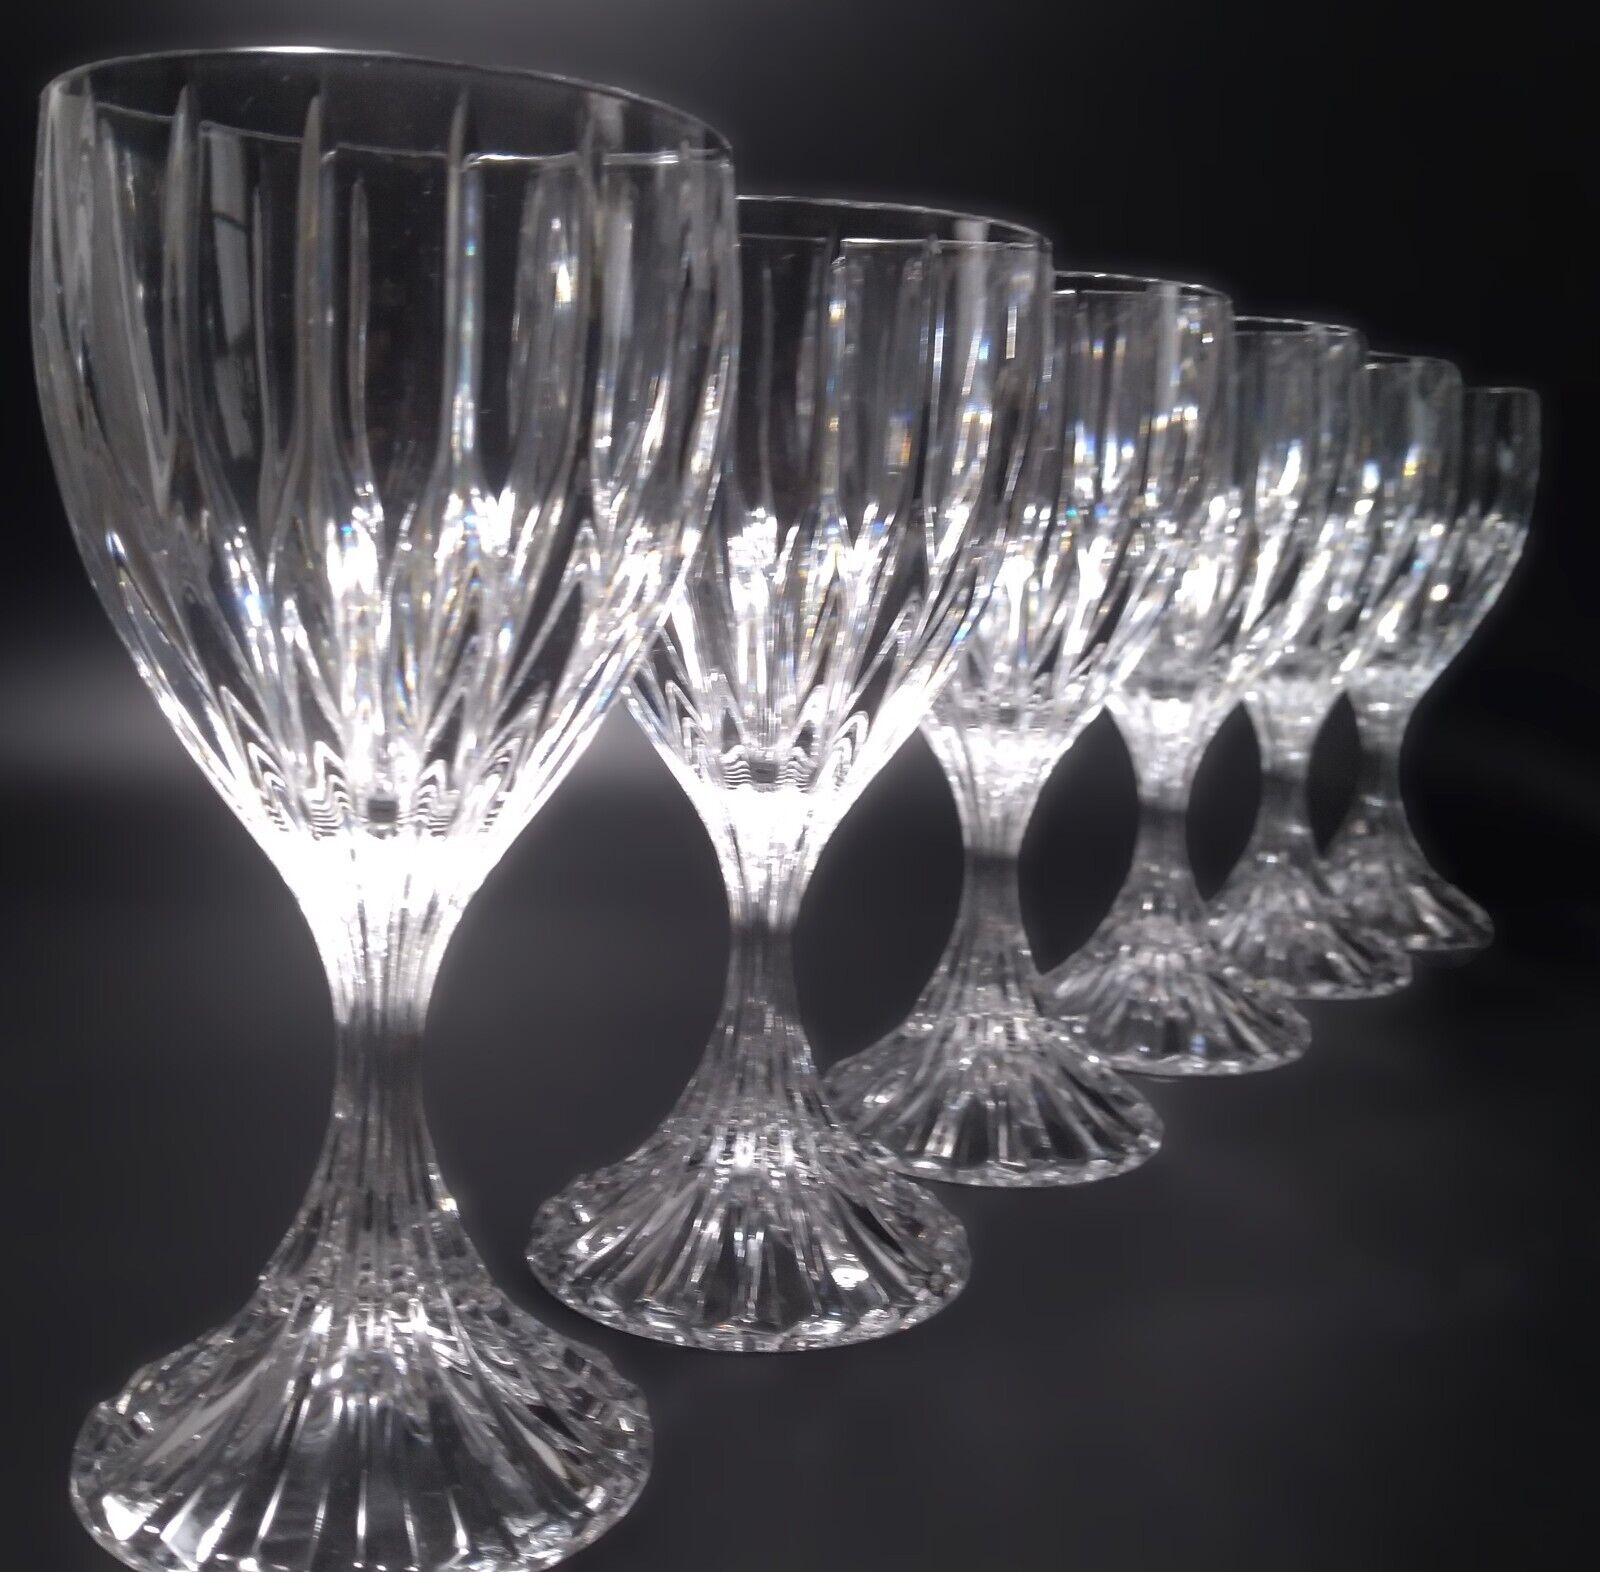 6 Mikasa PARK LANE Clear Crystal Wine Glasses Goblets Vertical Cuts Ribbed Stem